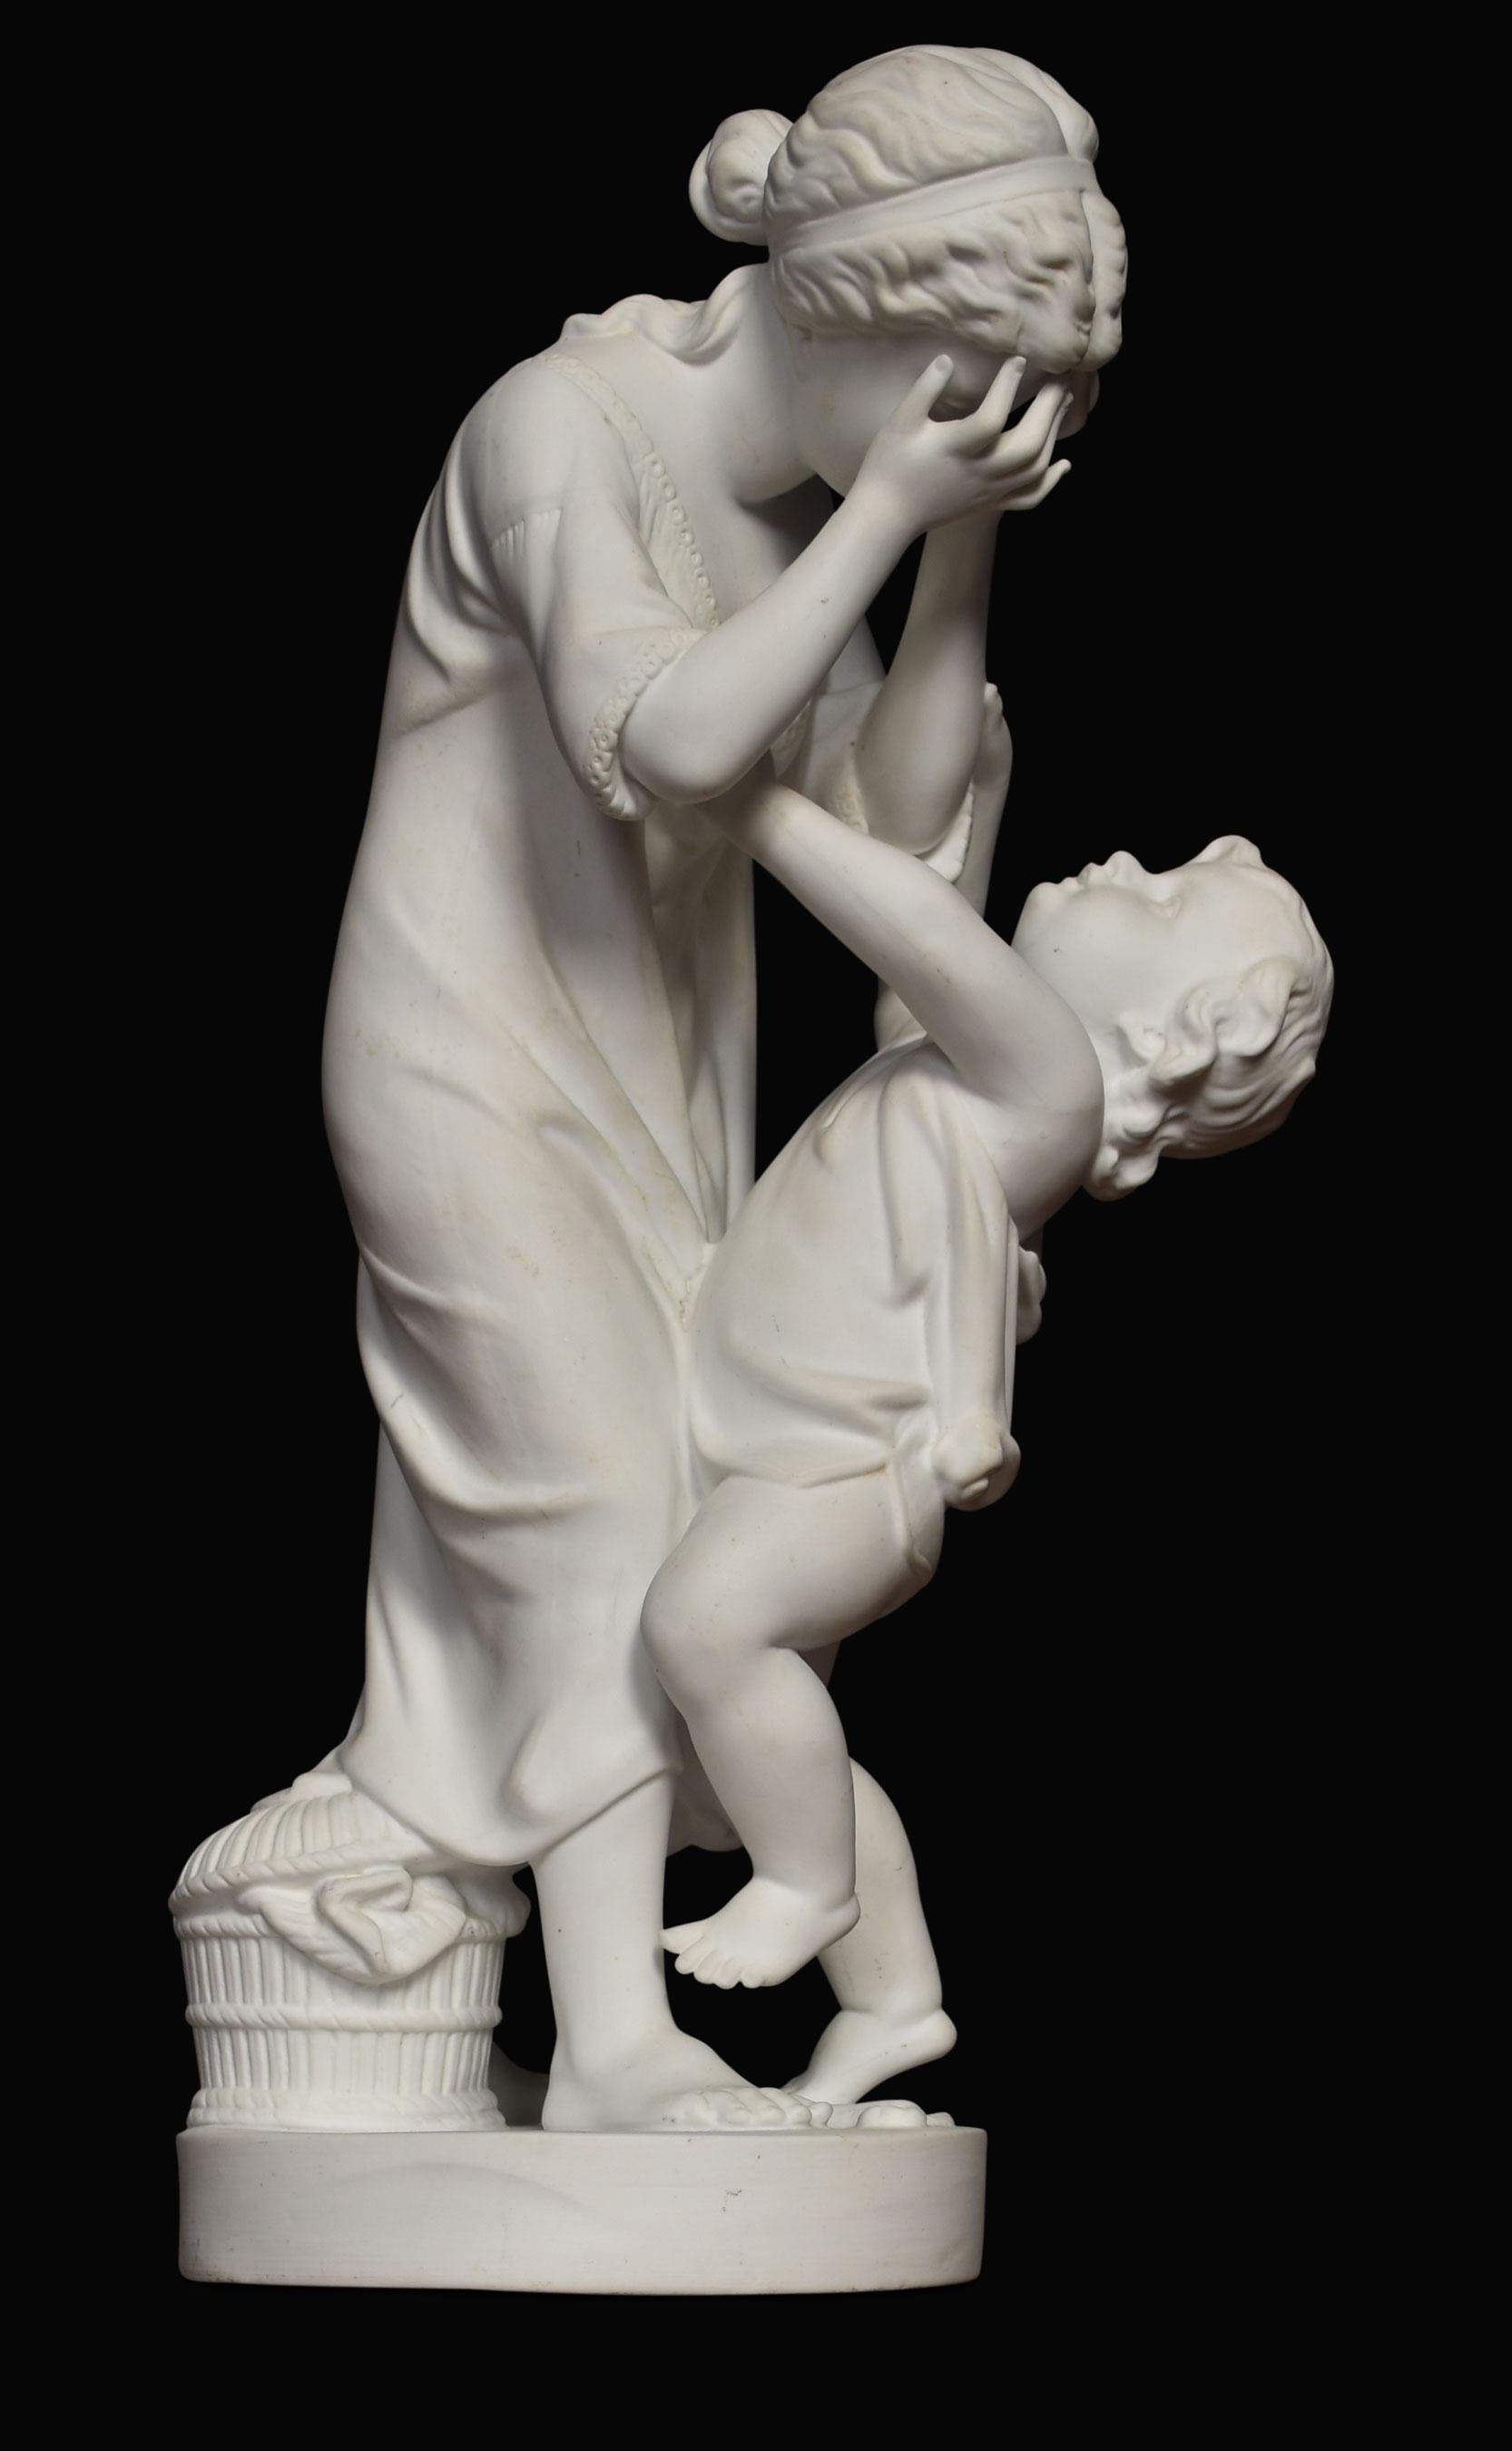 19th-century Parianware figure depicting mother and child raised up on circular base.
Dimensions
Height 15 inches
Width 6 inches
Depth 6 inches.